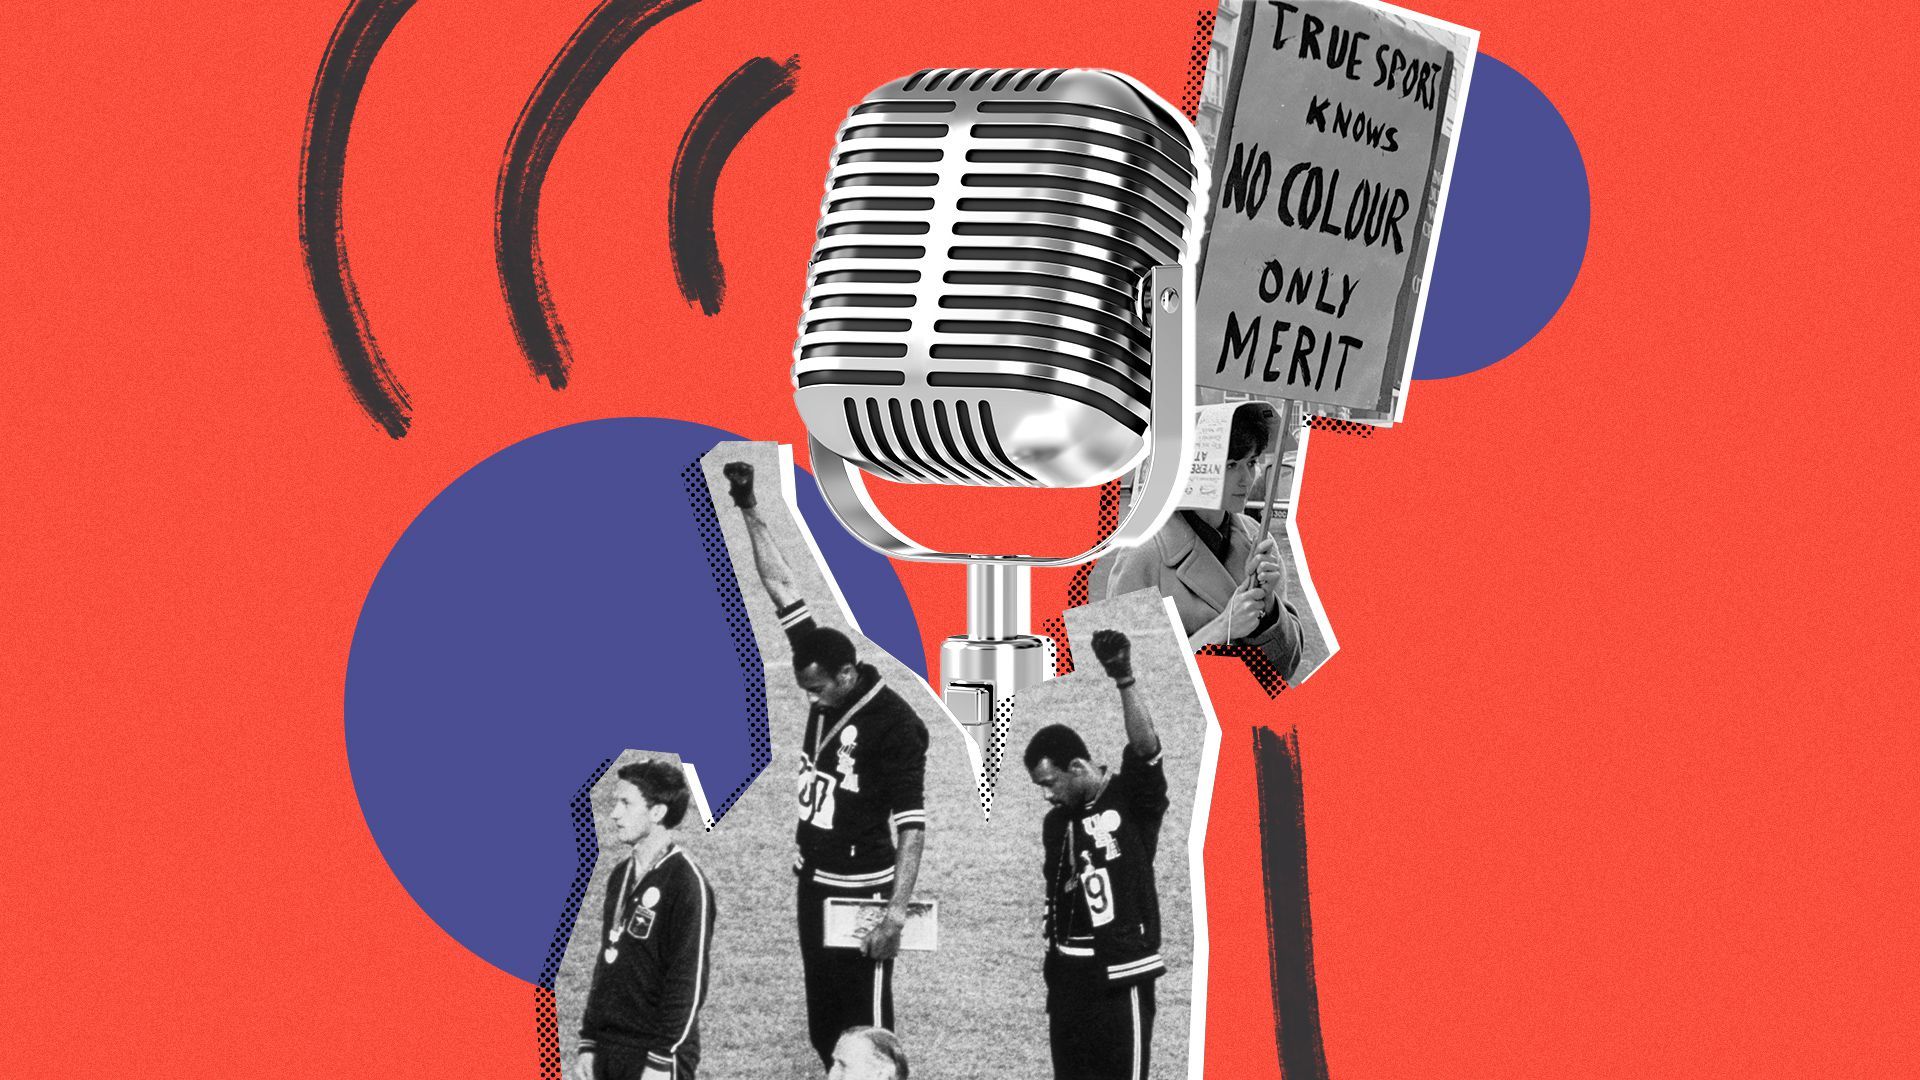 Photo illustration of an old-fashioned microphone, Tommie Smith and John Carlos raising their fists at the 1968 Olympics, and a woman with a sign reading "True sport knows no colour only merit."